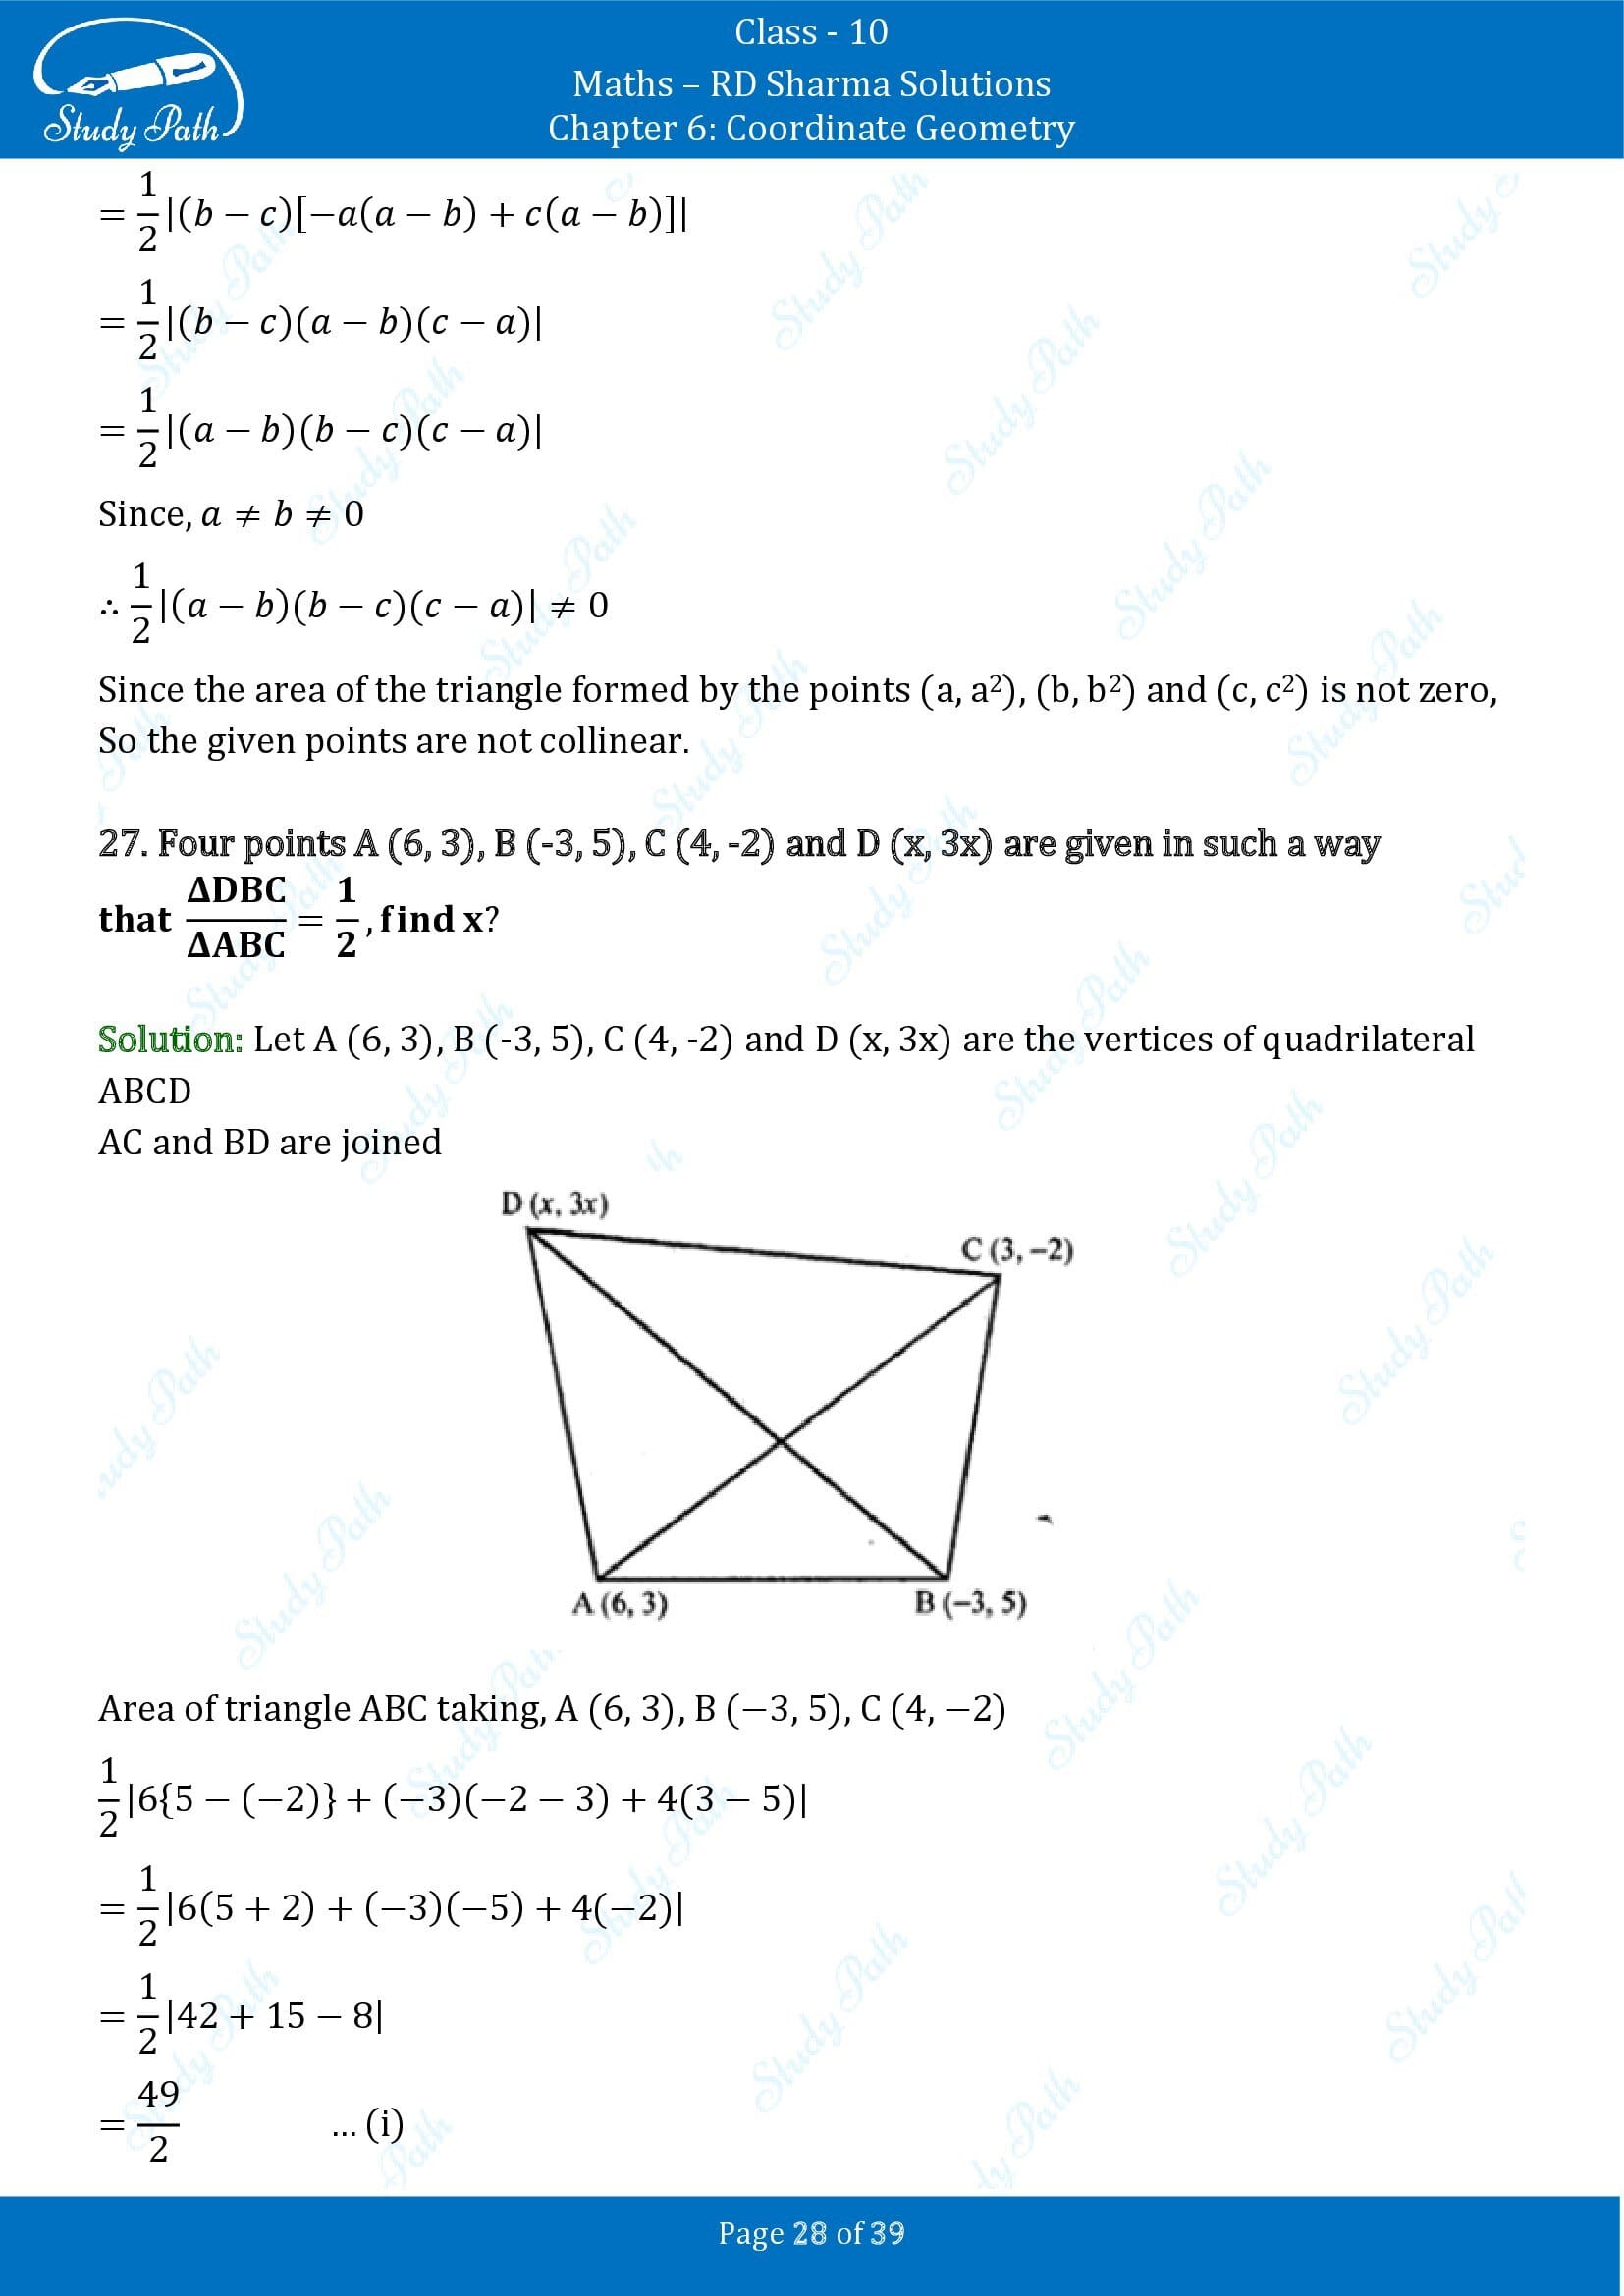 RD Sharma Solutions Class 10 Chapter 6 Coordinate Geometry Exercise 6.5 0028